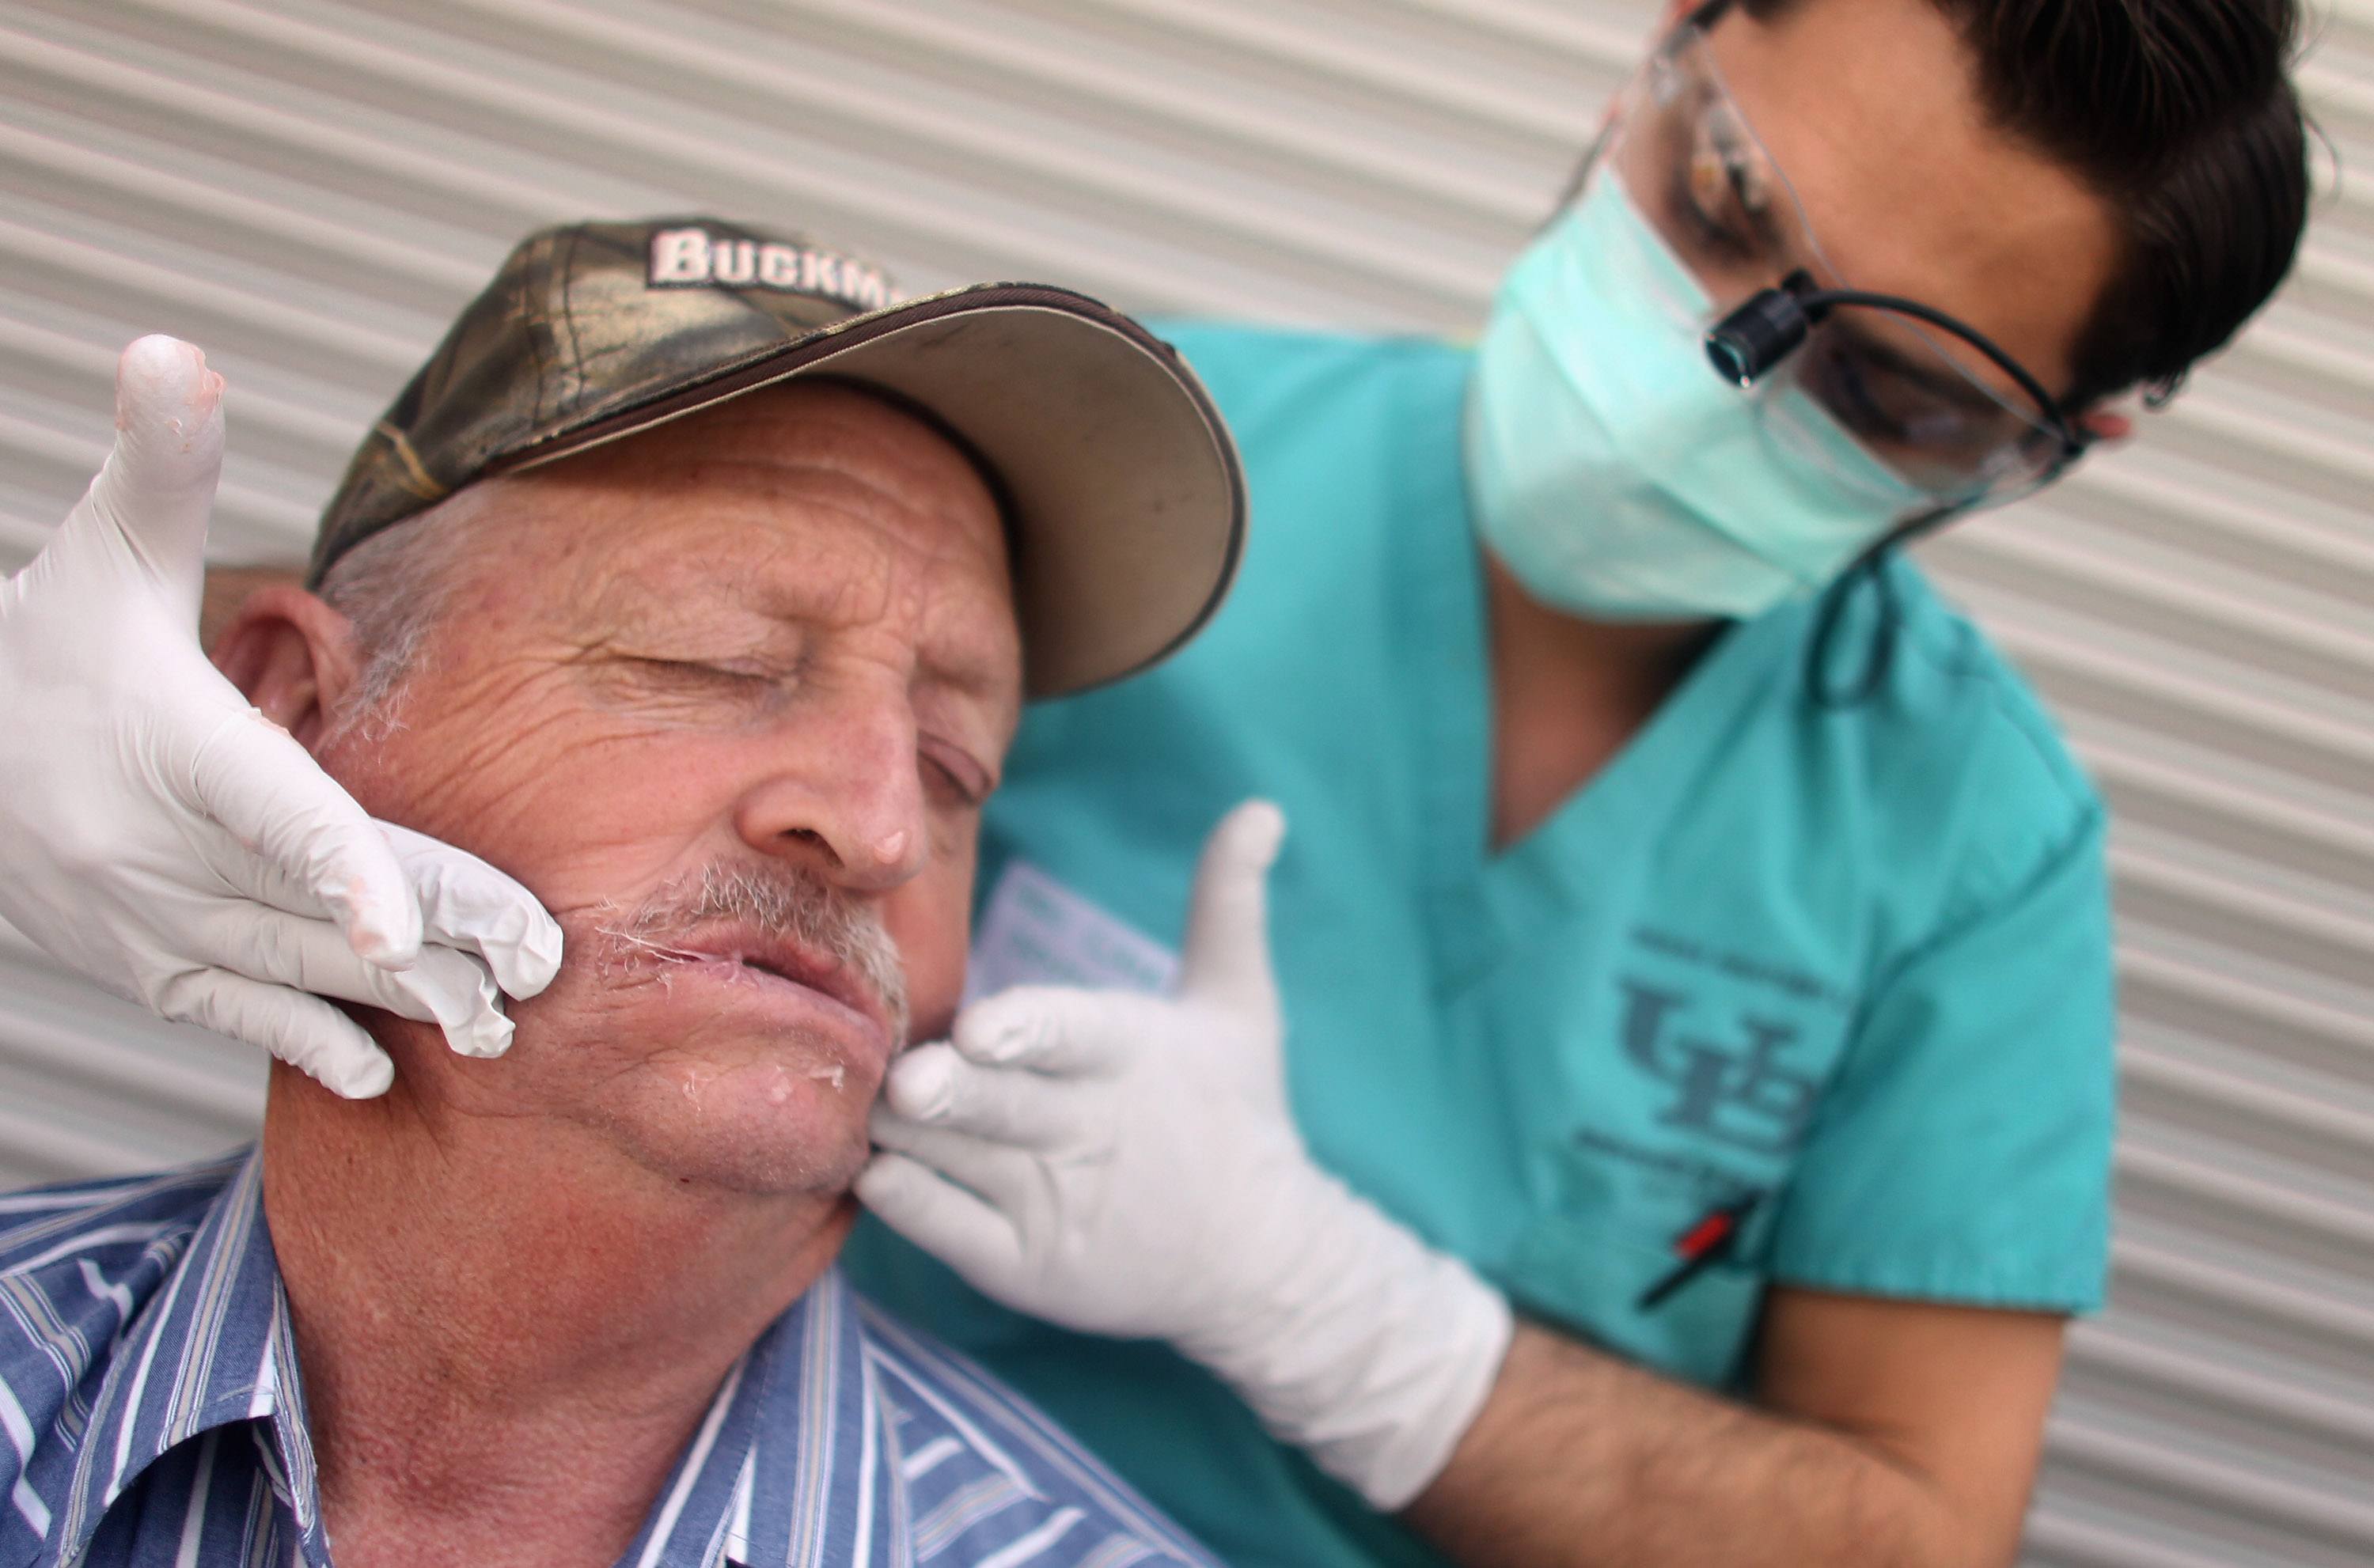 A patient receives dental care at a Tennessee clinic